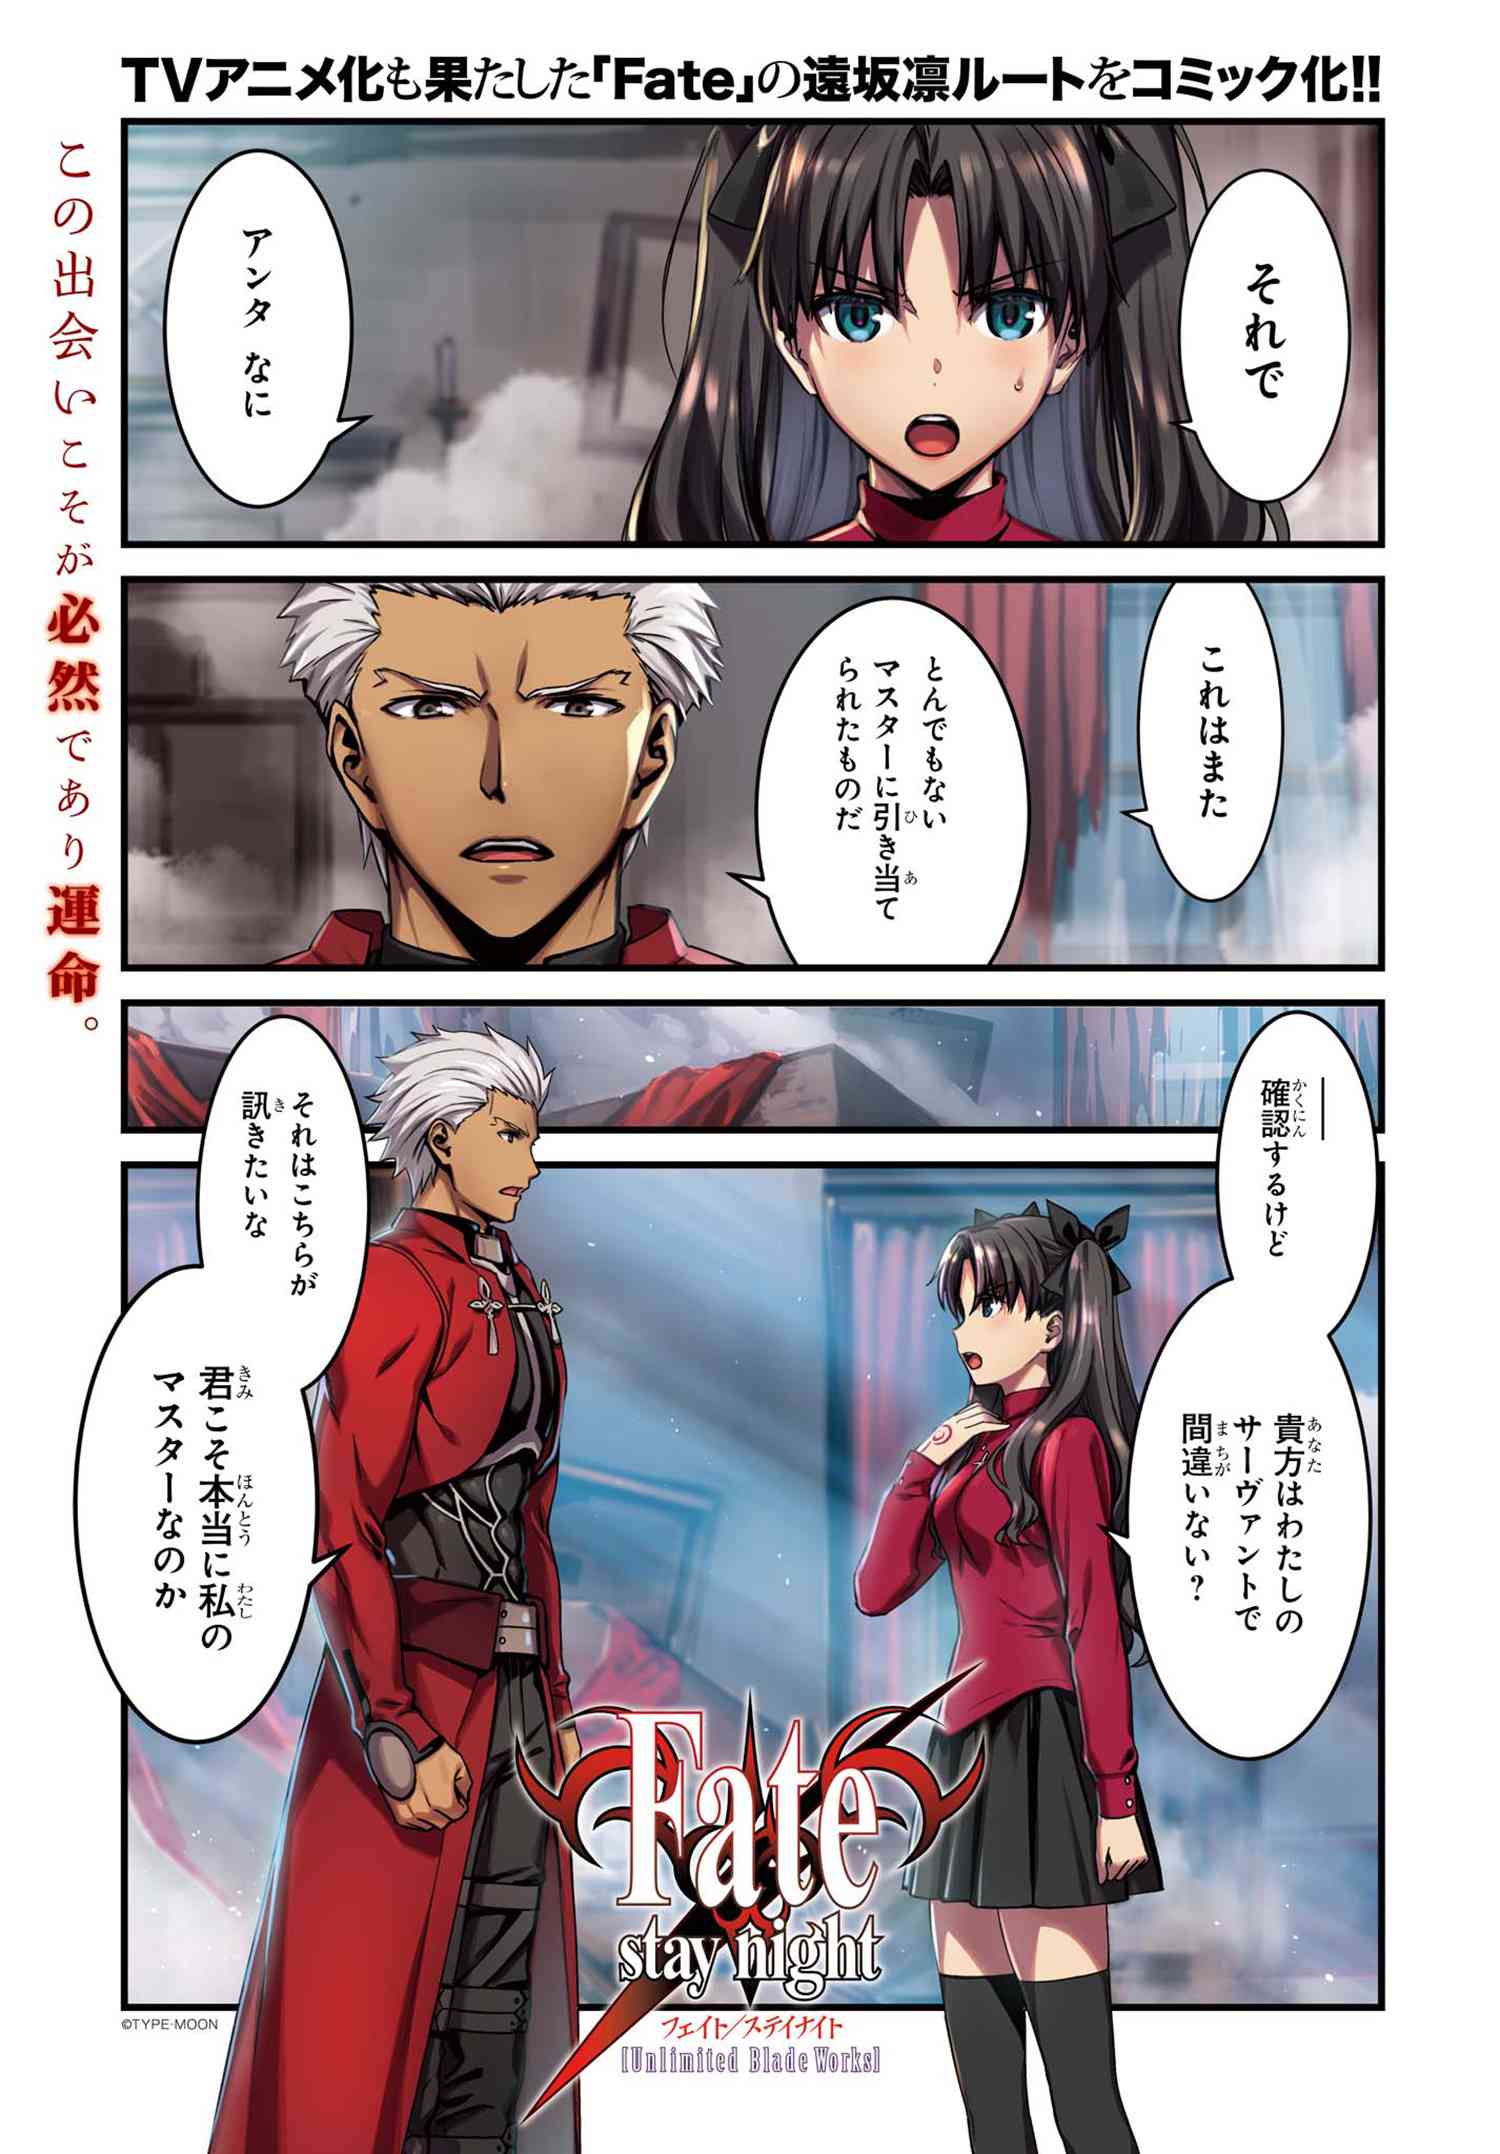 1-1]Fate/stay night［Unlimited Blade Works］ - 森山大輔 / TYPE ...